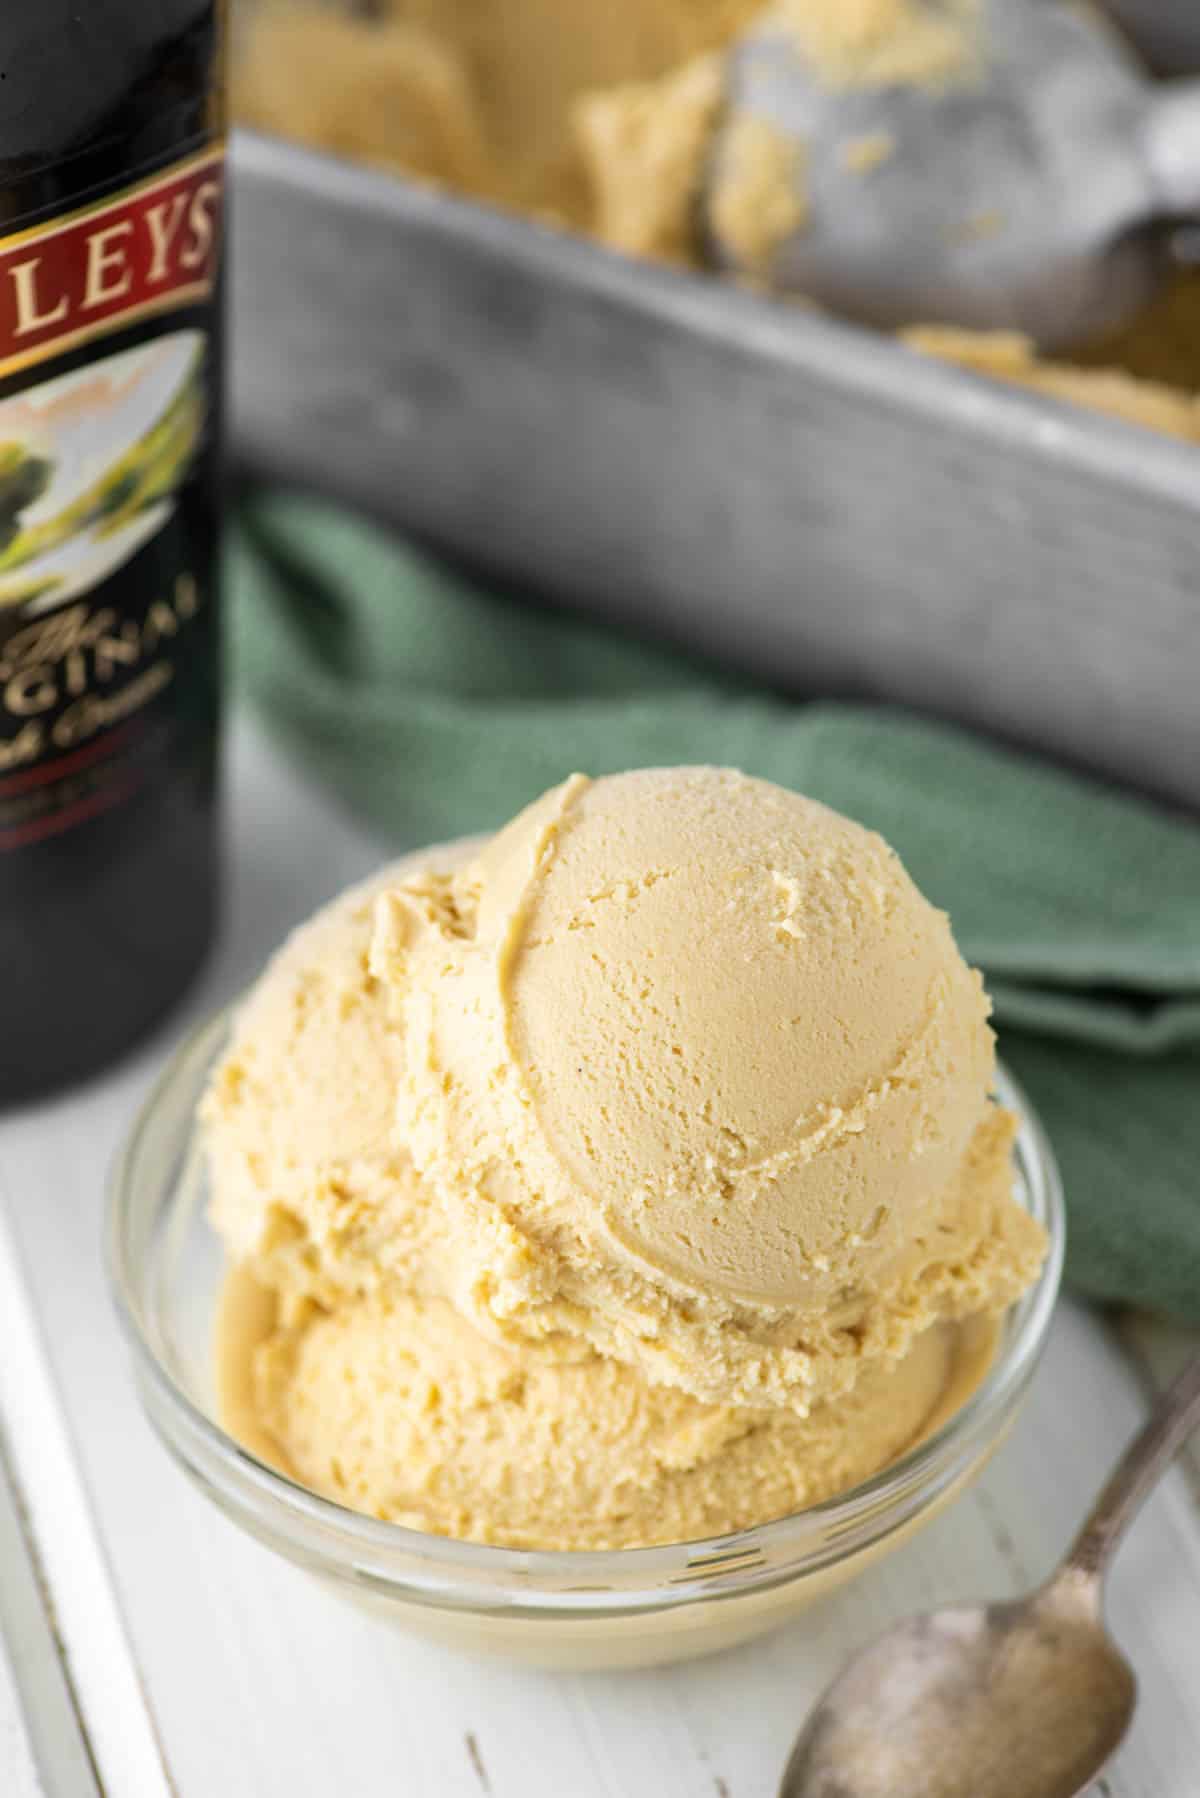 ice cream made with baileys in bowl